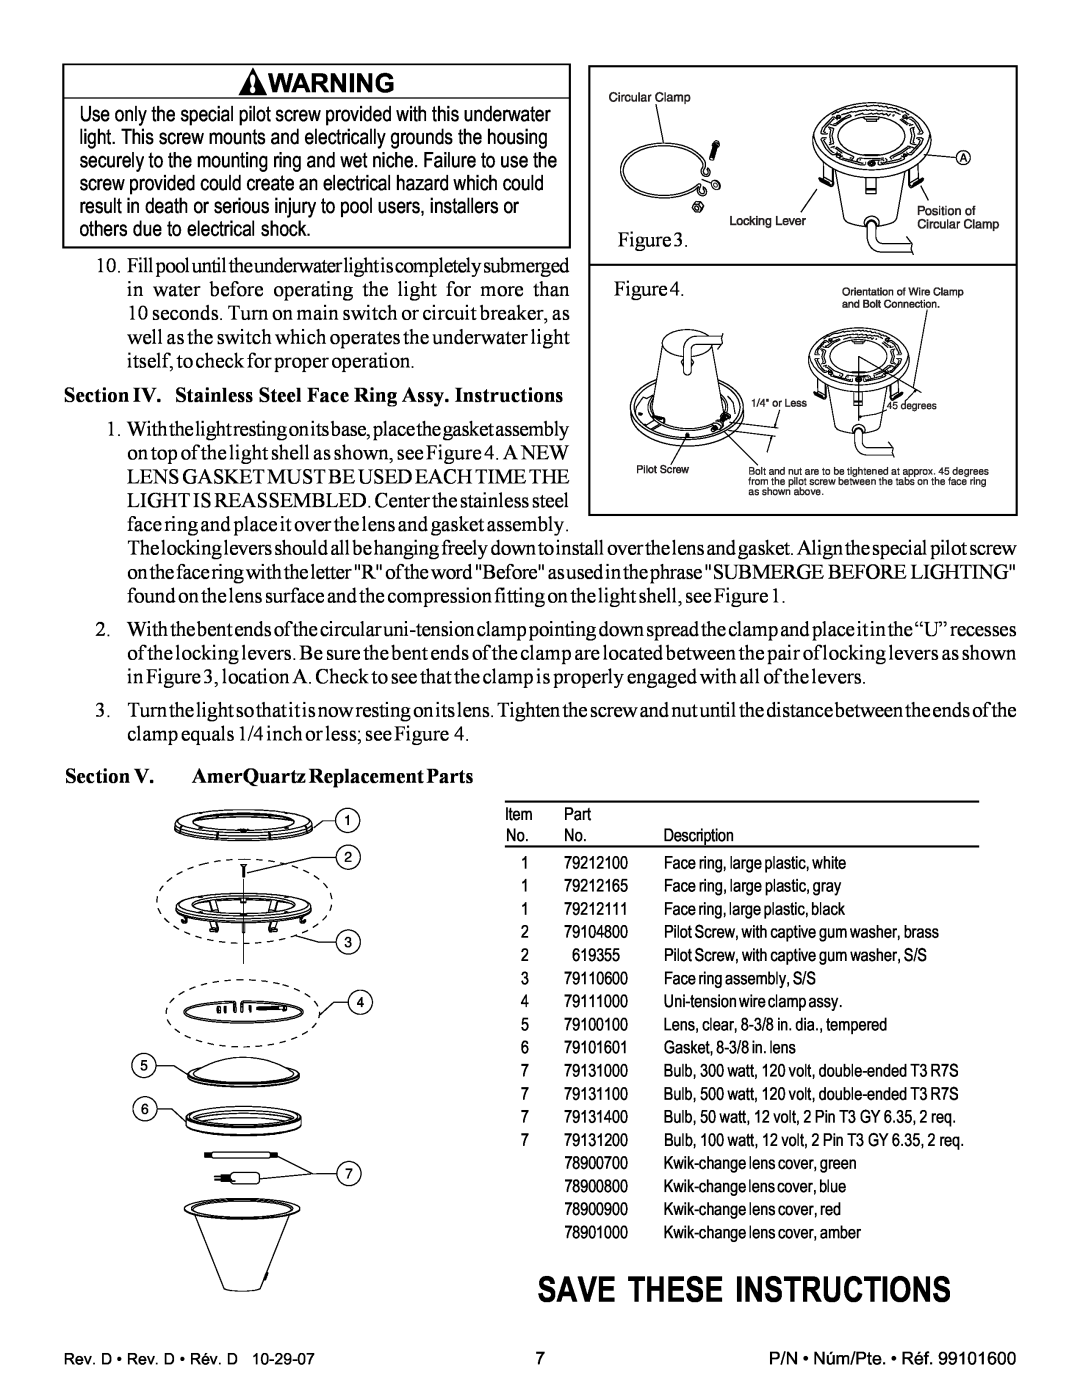 Pentair AmerQuartz Save These Instructions, Section IV. Stainless Steel Face Ring Assy. Instructions 